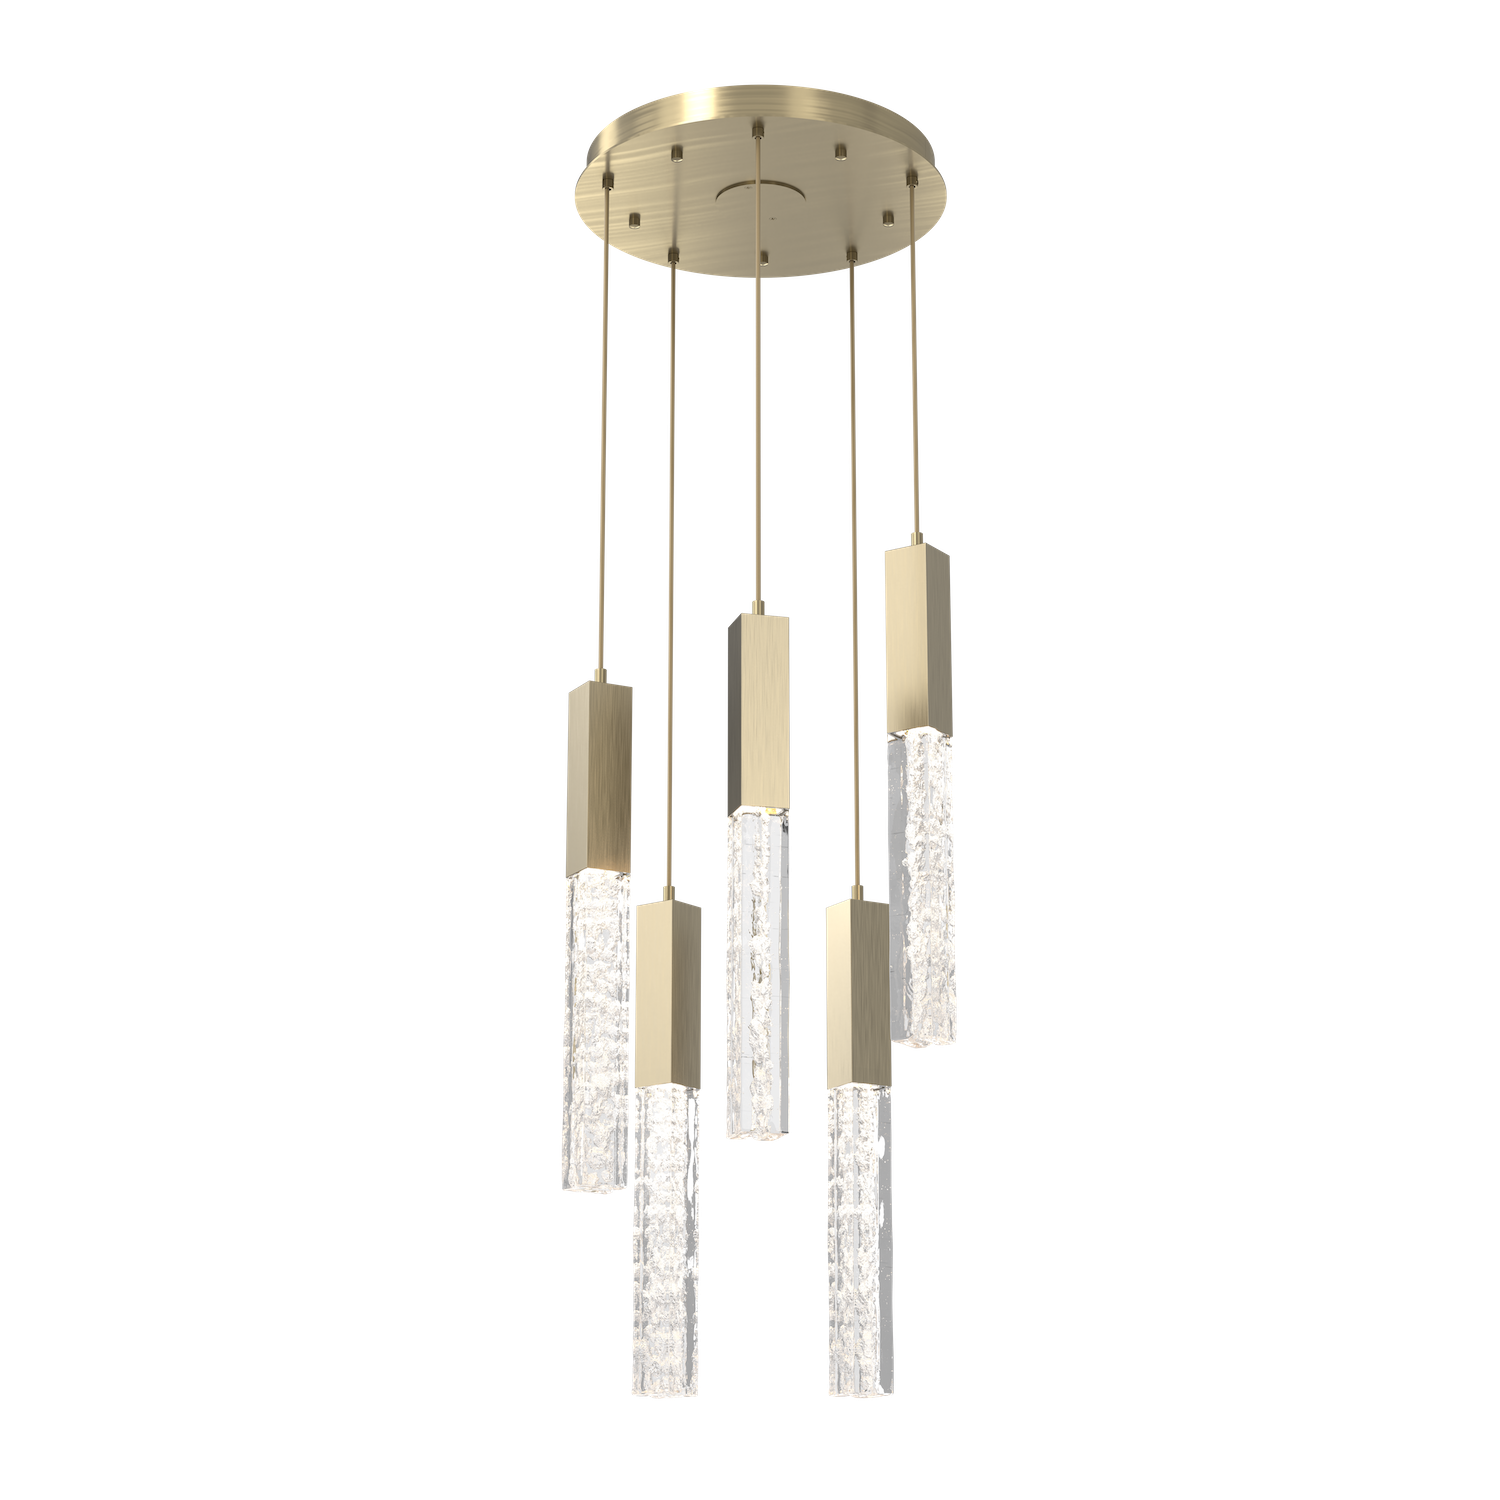 CHB0060-05-HB-GC-Hammerton-Studio-Axis-5-Light-Pendant-Chandelier-with-Heritage-Brass-finish-and-clear-cast-glass-and-LED-lamping